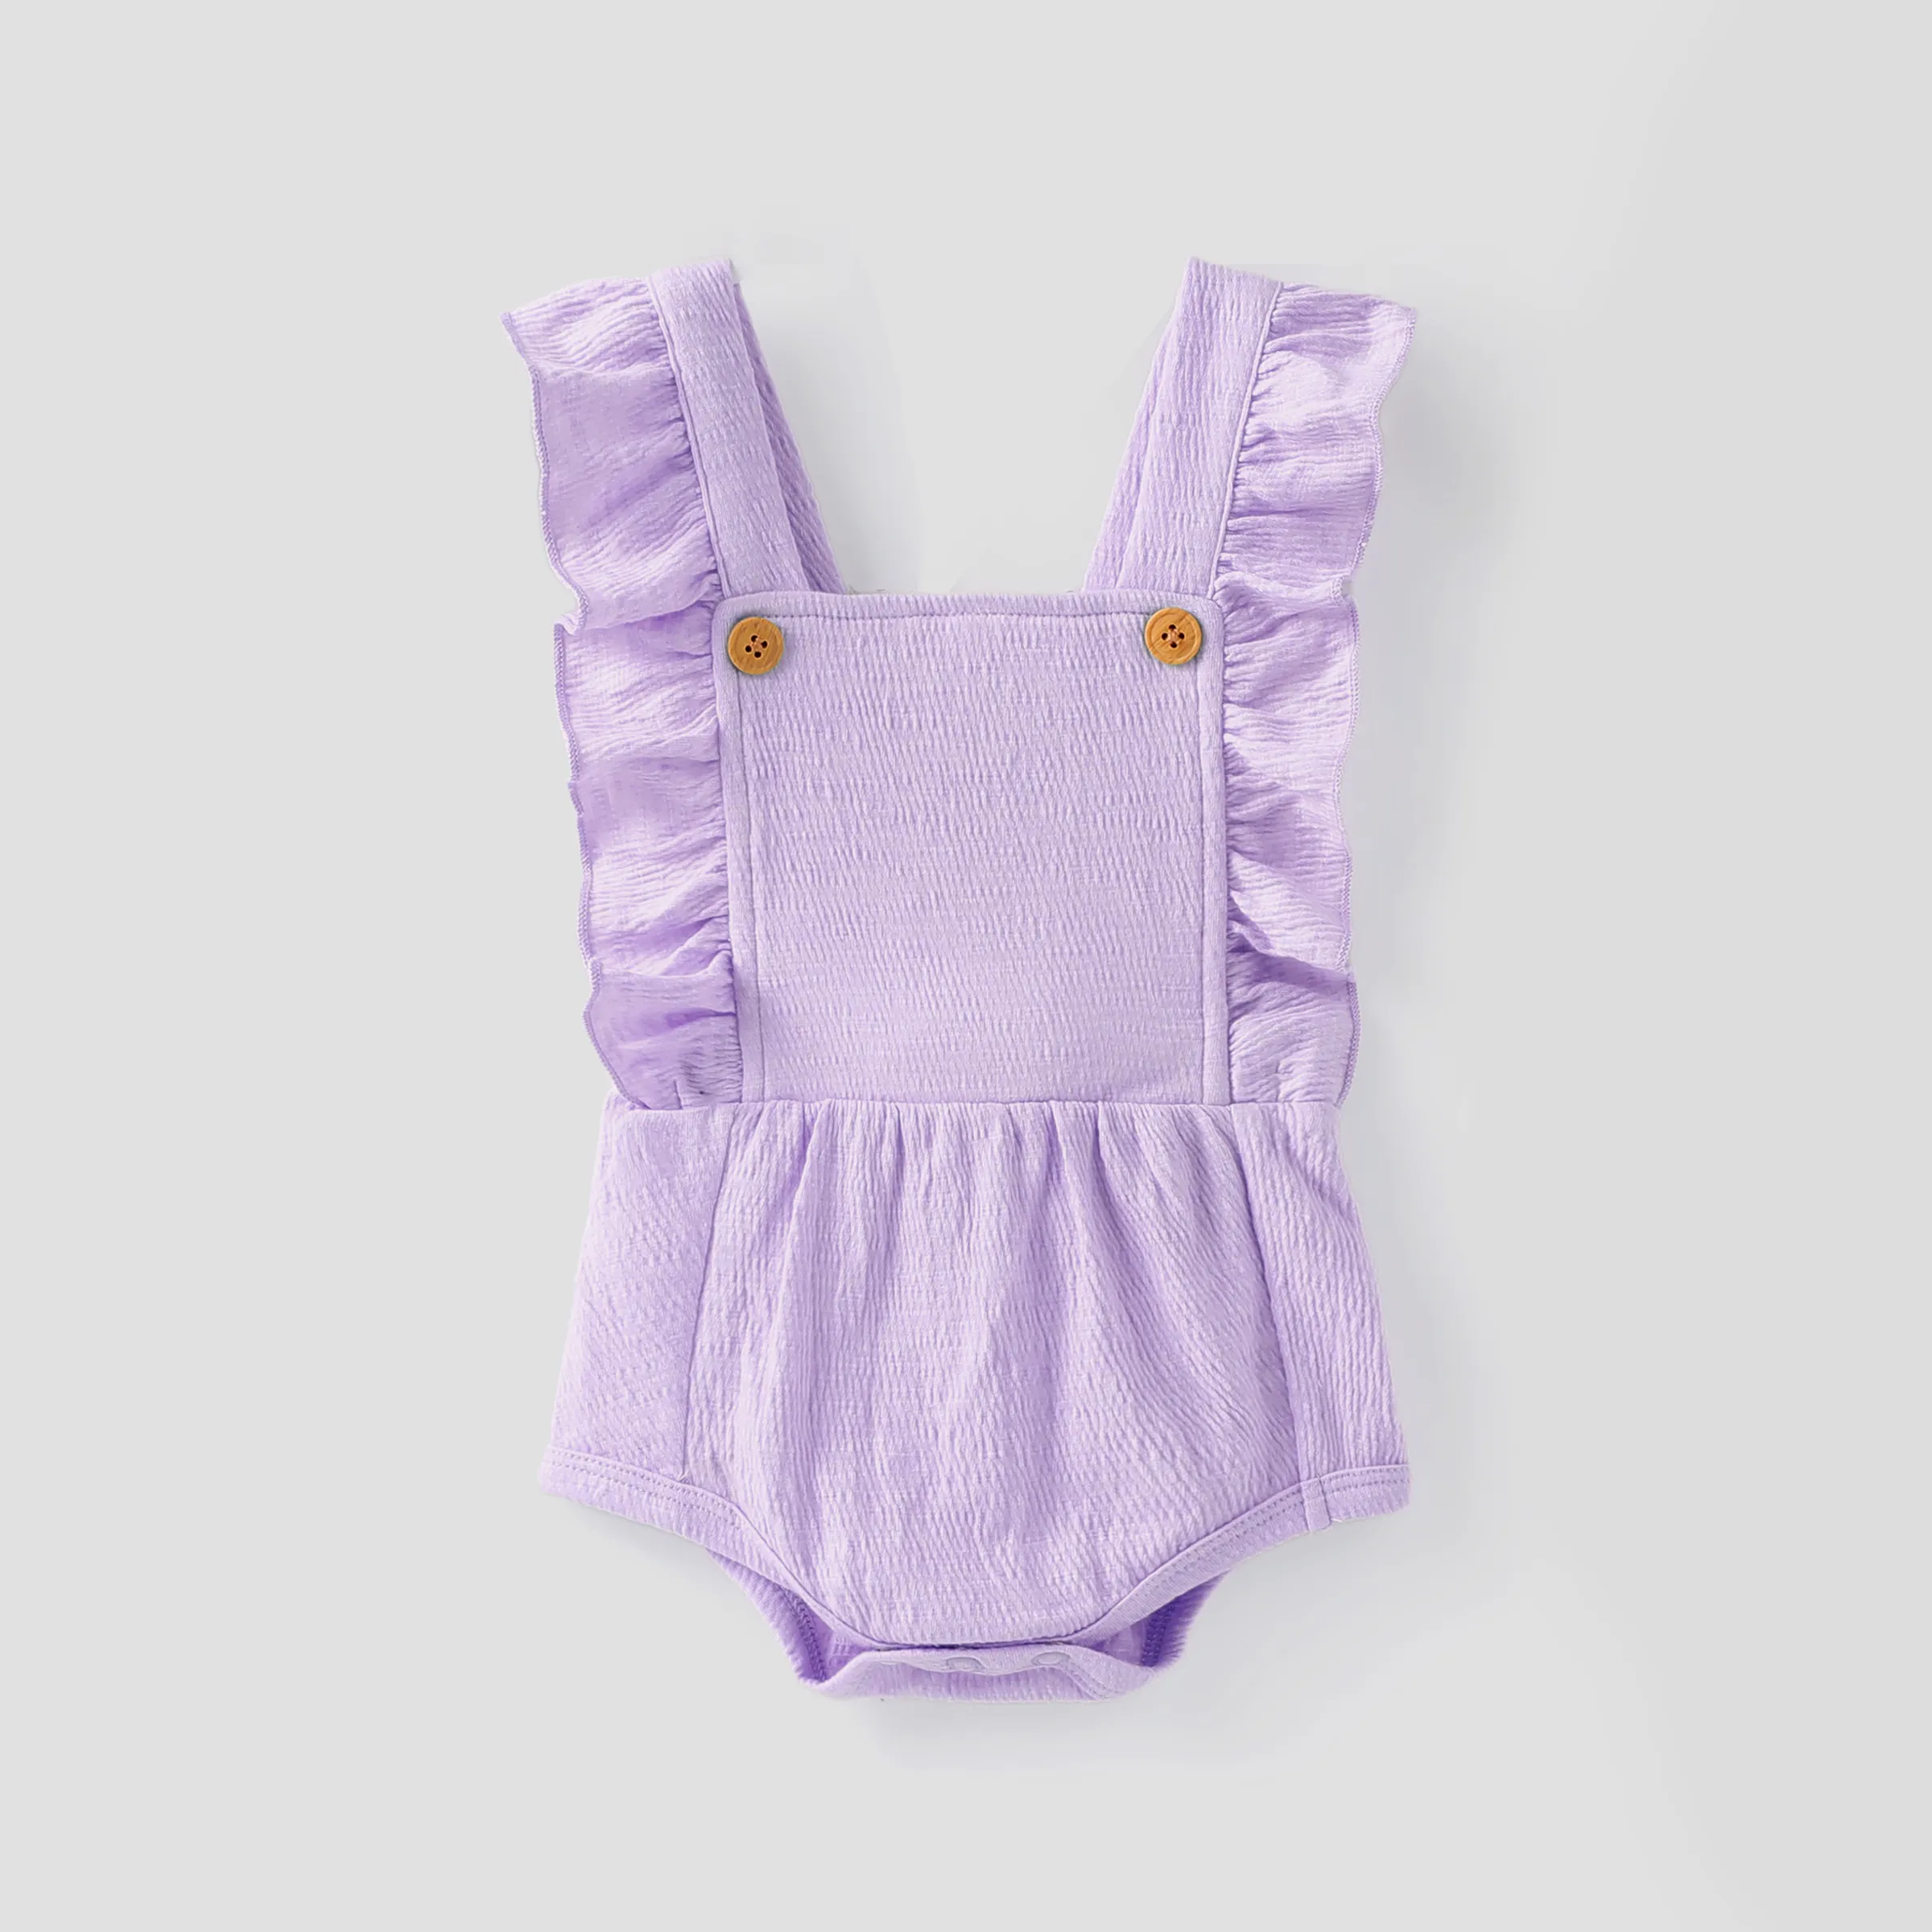 Baby Girl Solid Color Ruffled Button Romper